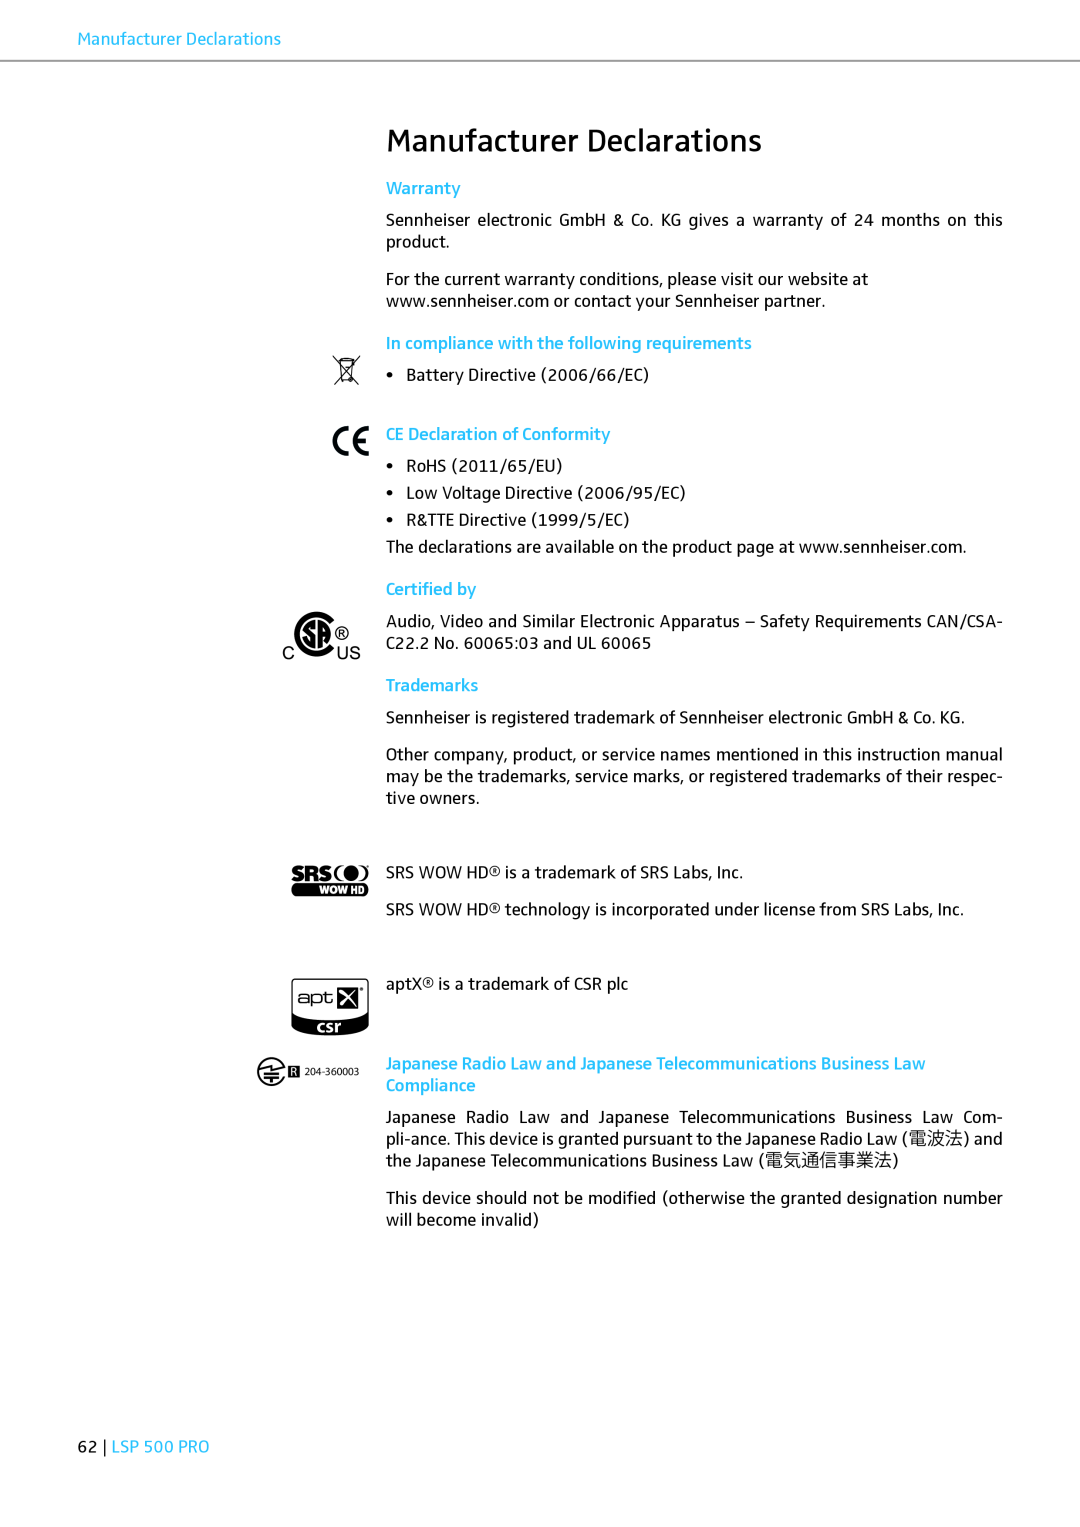 Sennheiser LSP 500 PRO Manufacturer Declarations, Warranty, In compliance with the following requirements, Certified by 